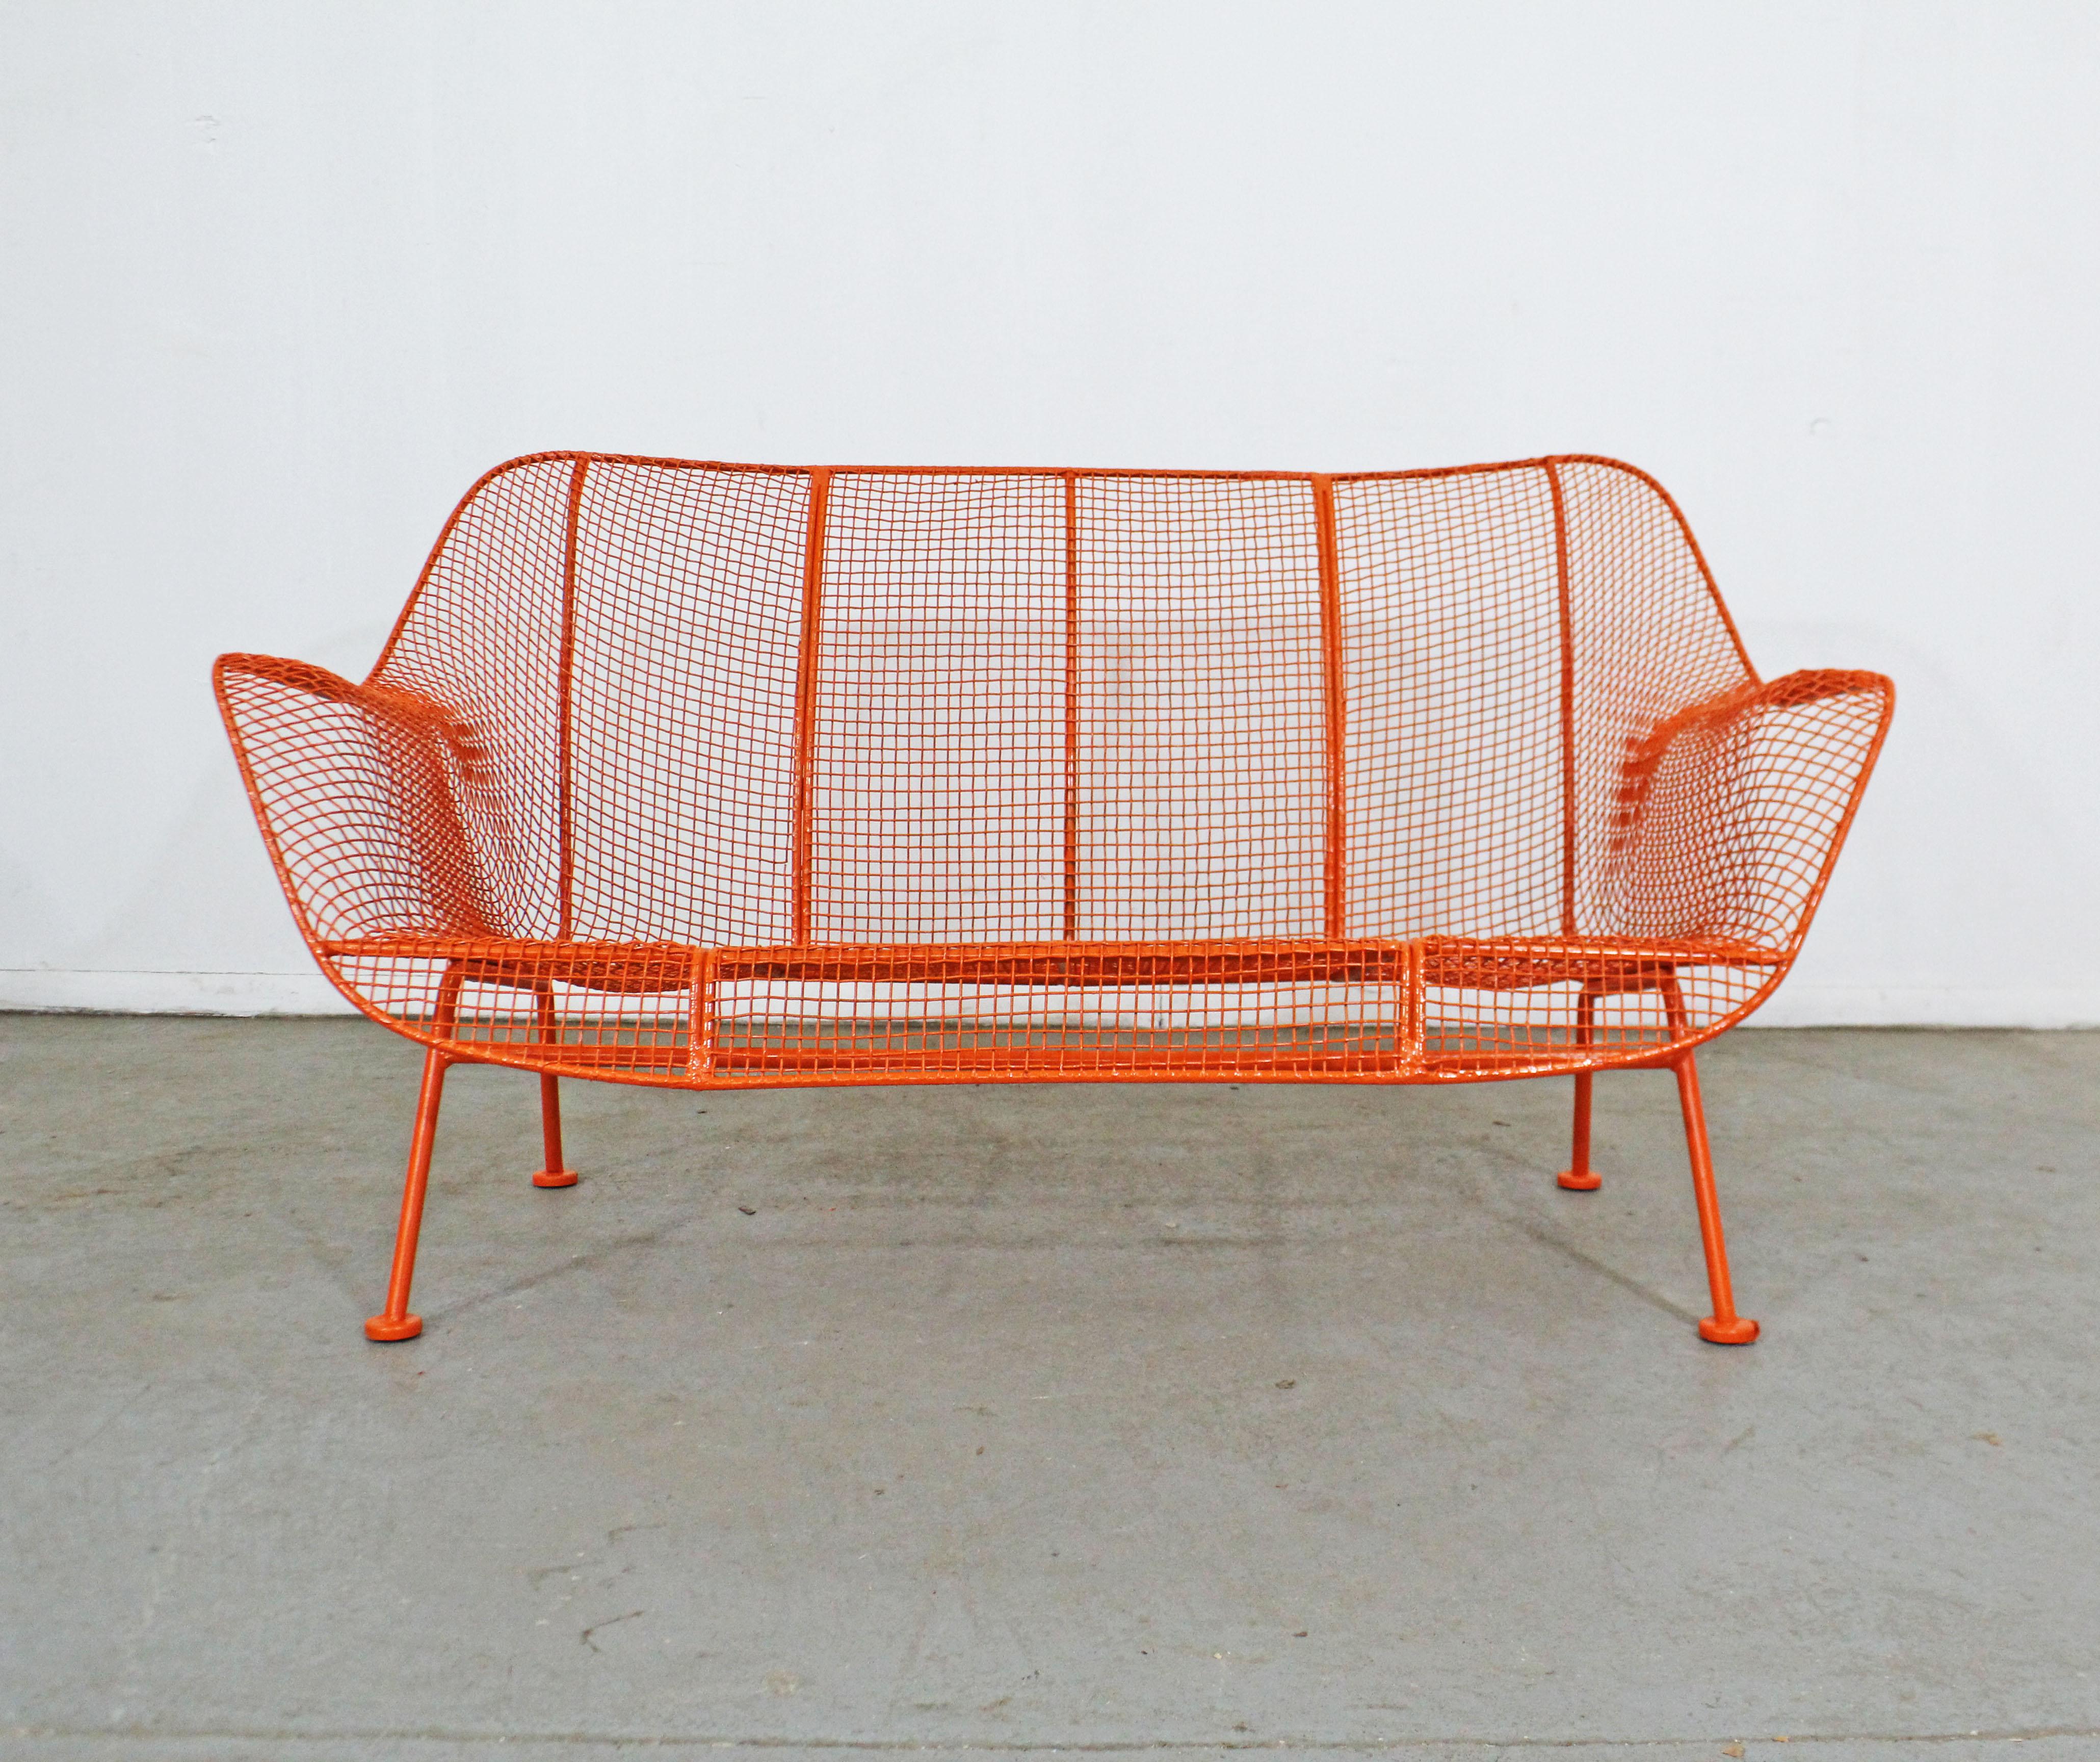 What a find. Offered is a vintage outdoor bench by Russell Woodard 'Sculptura'. It has a wrought iron frame with a low-slung woven mesh steel seat made to withstand all weather conditions. Perfect for outdoor lounging. It is in good condition,